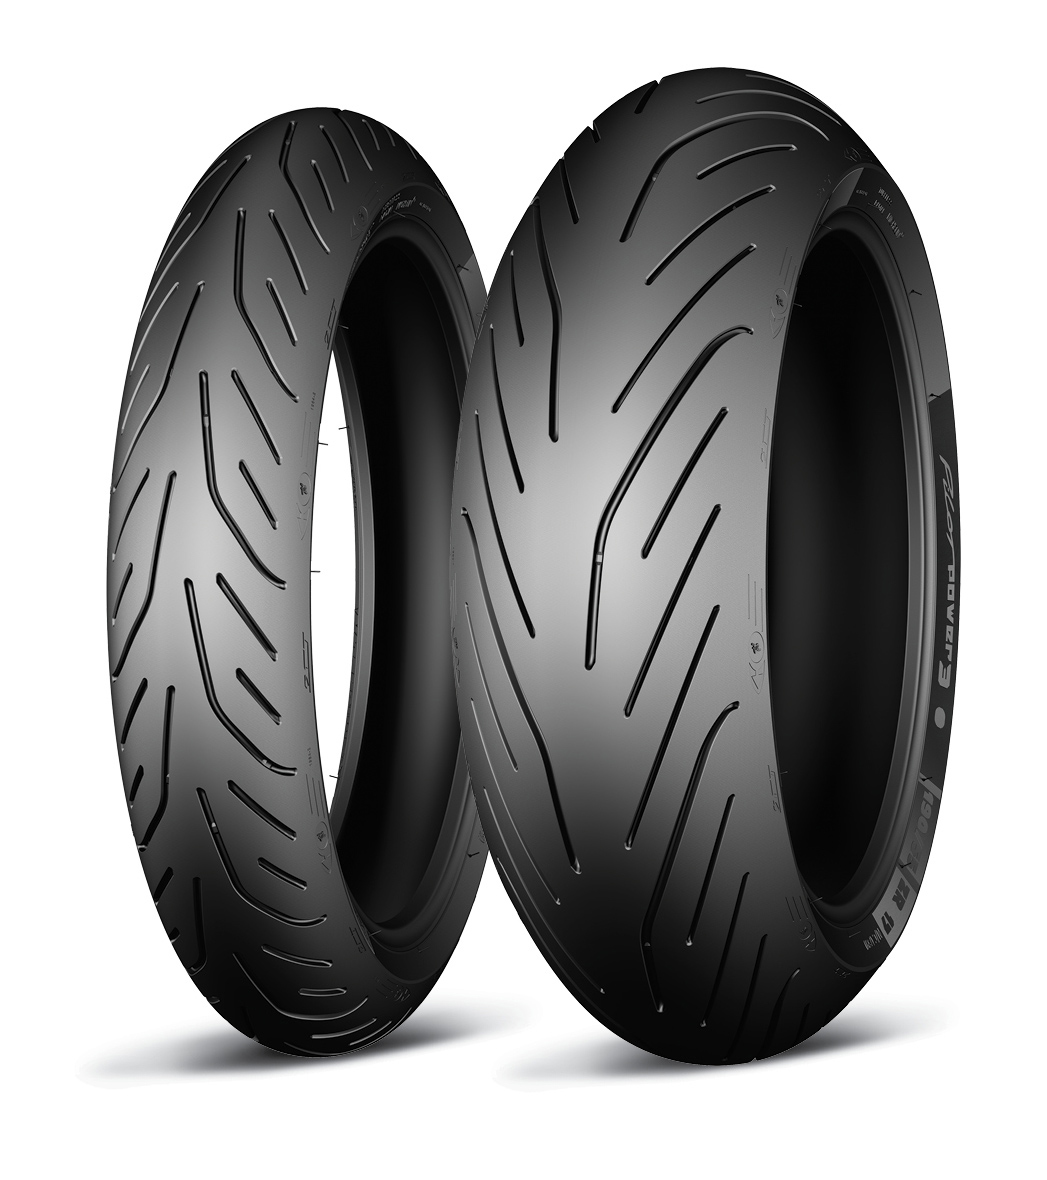 Michelin Pilot Power 3 - Tyre Reviews and Tests